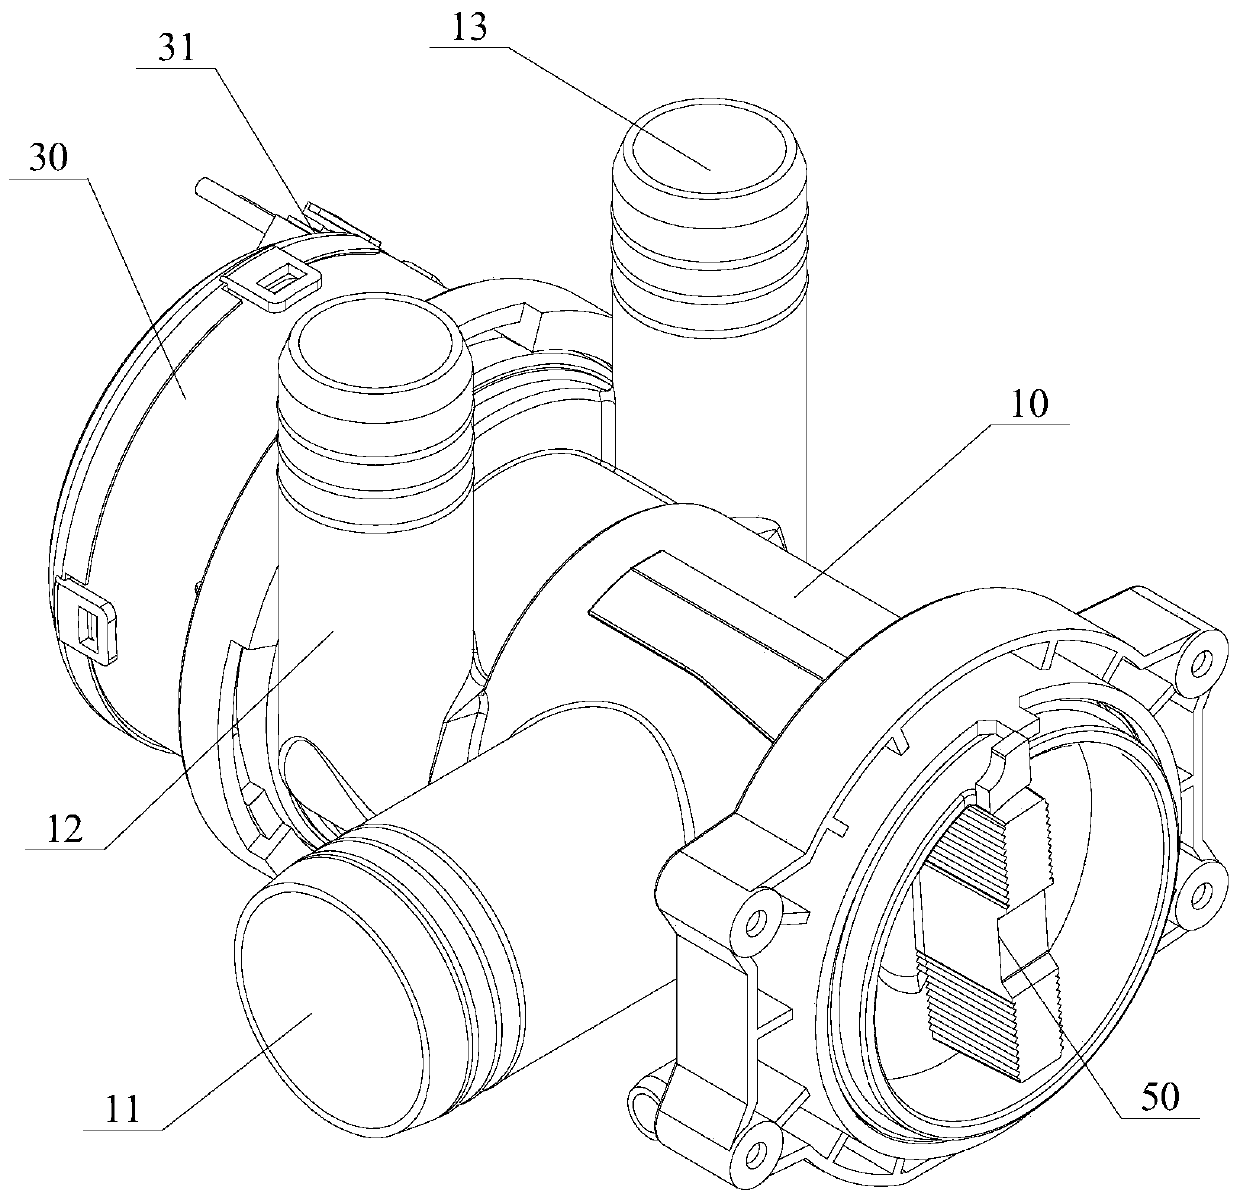 Double-outlet water pump for washing machine